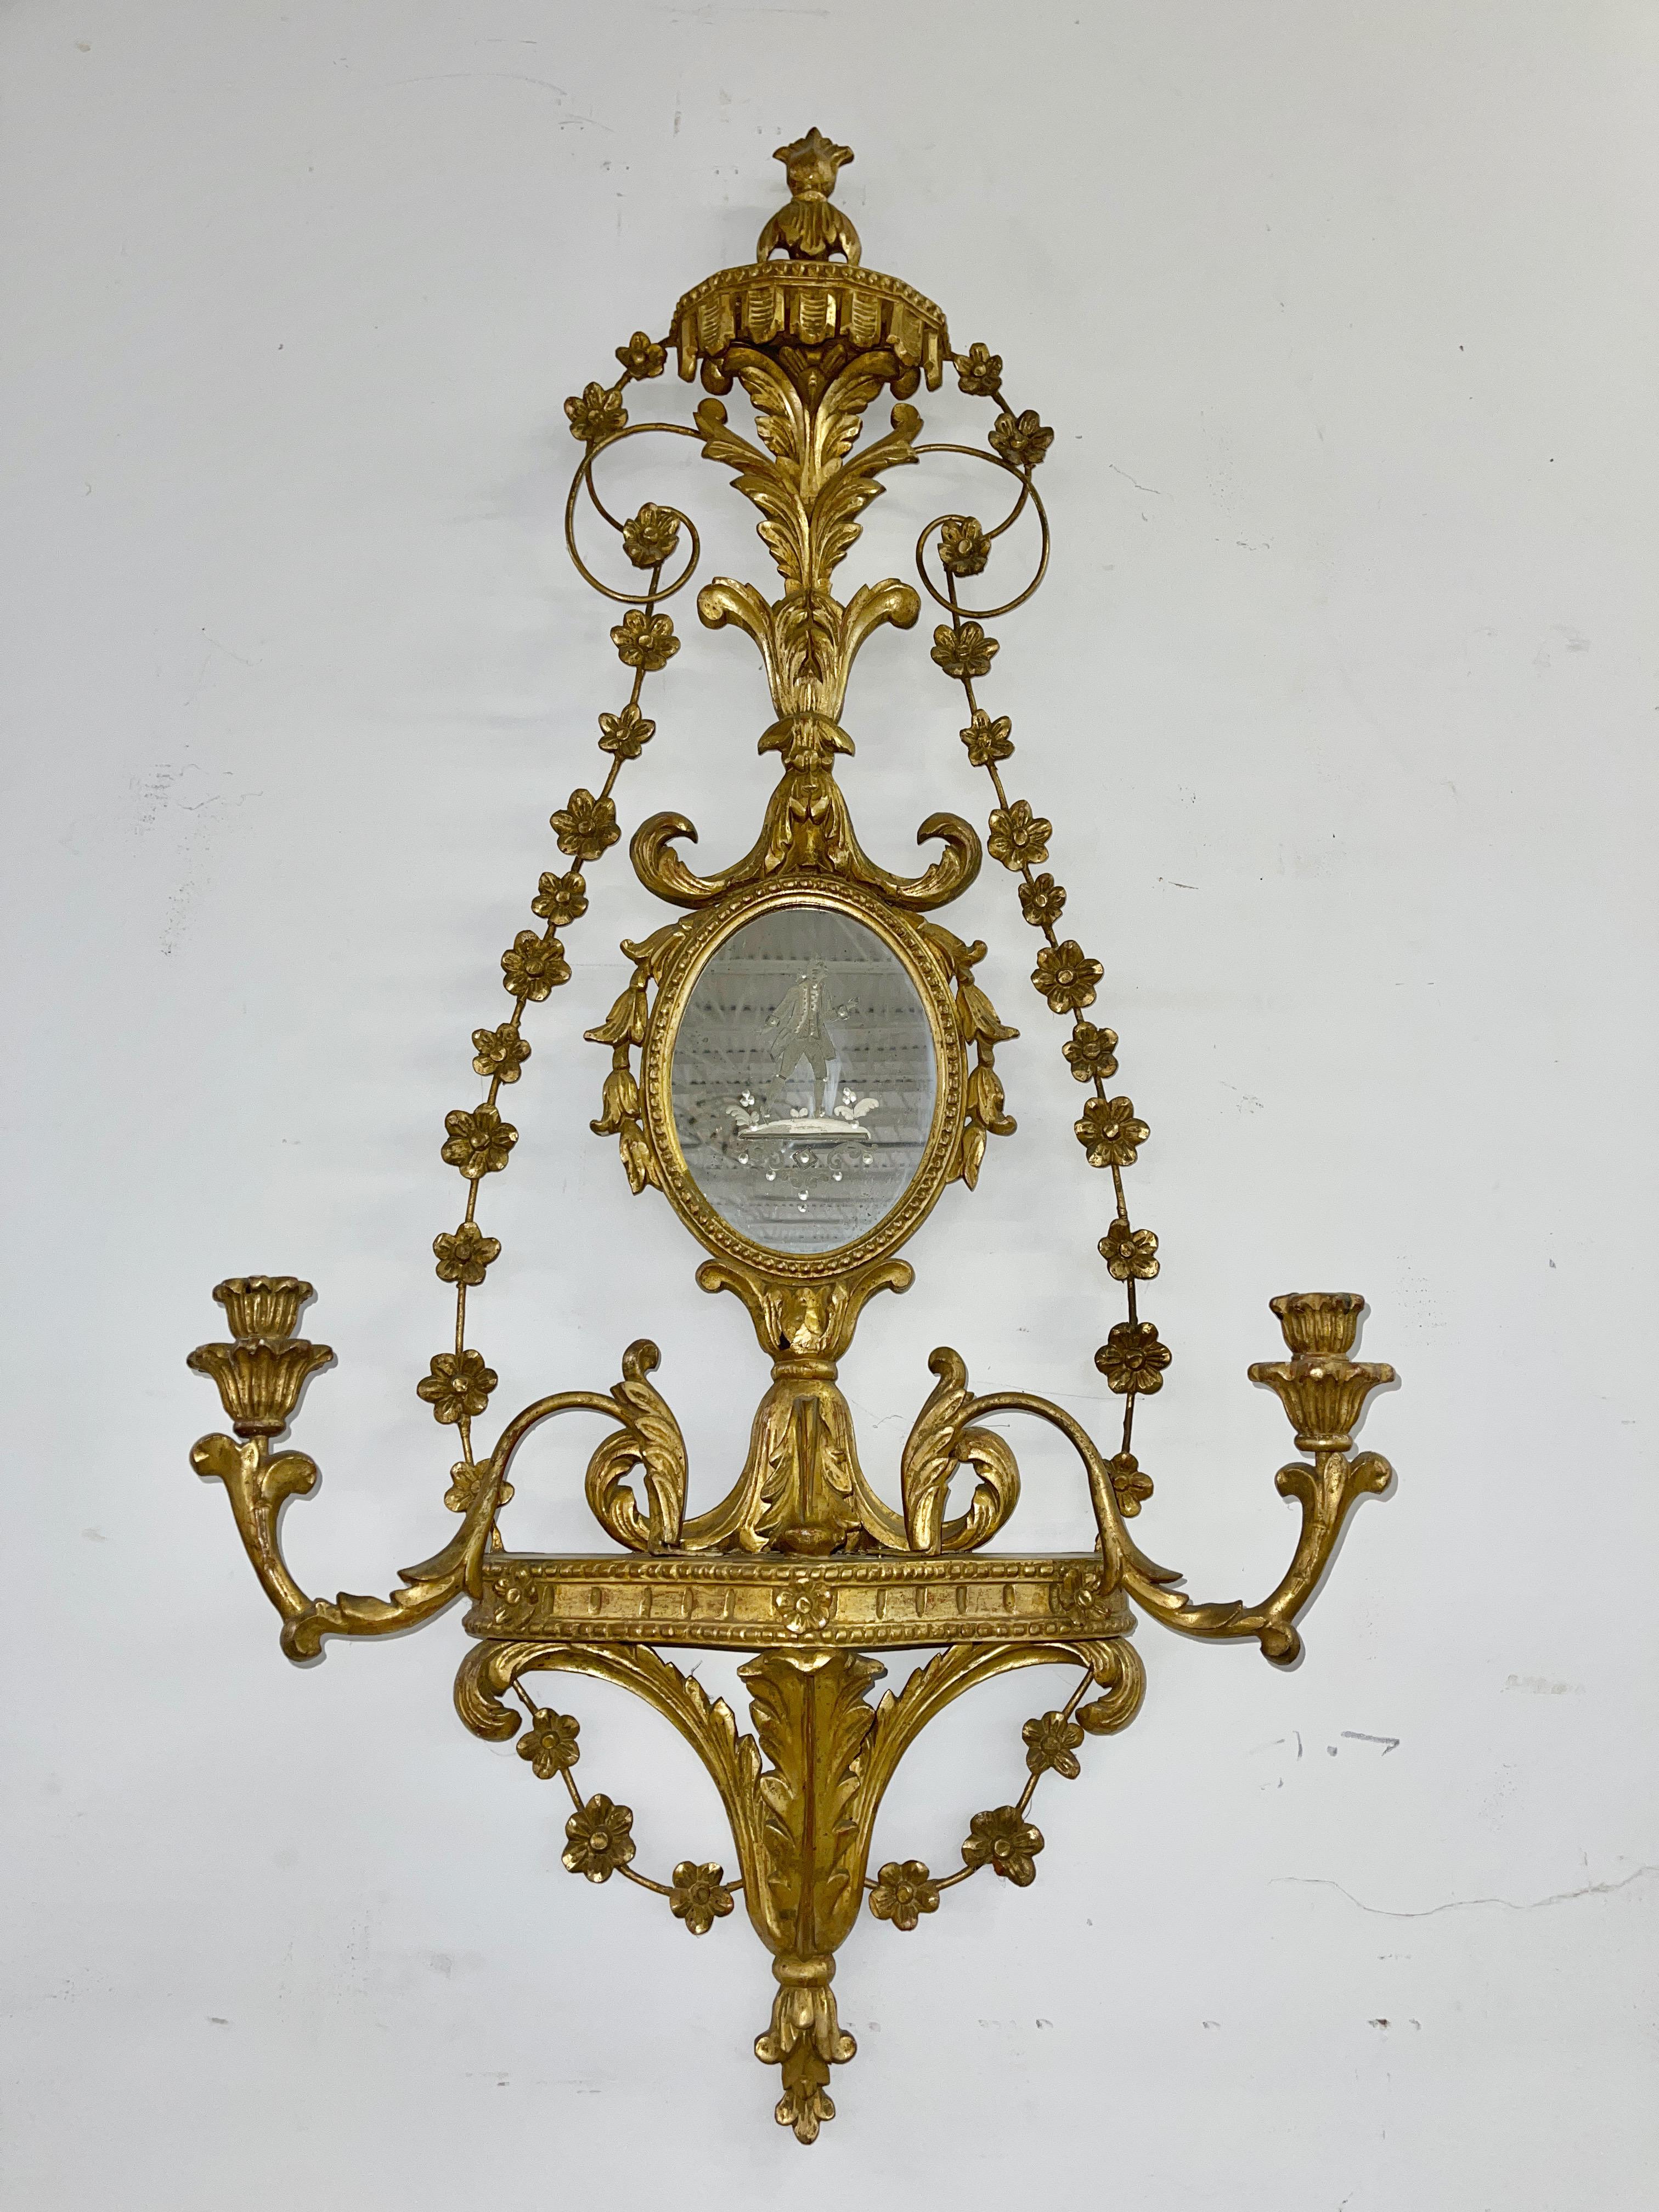 Very elaborate scrolling foliate carvings on these Italian giltwood girondole mirrors with candle sconces. 
Oval mirrors reverse etched with Venetian figures, male and female. 
Candle holder arms are positionable. 
Very fine condition with no